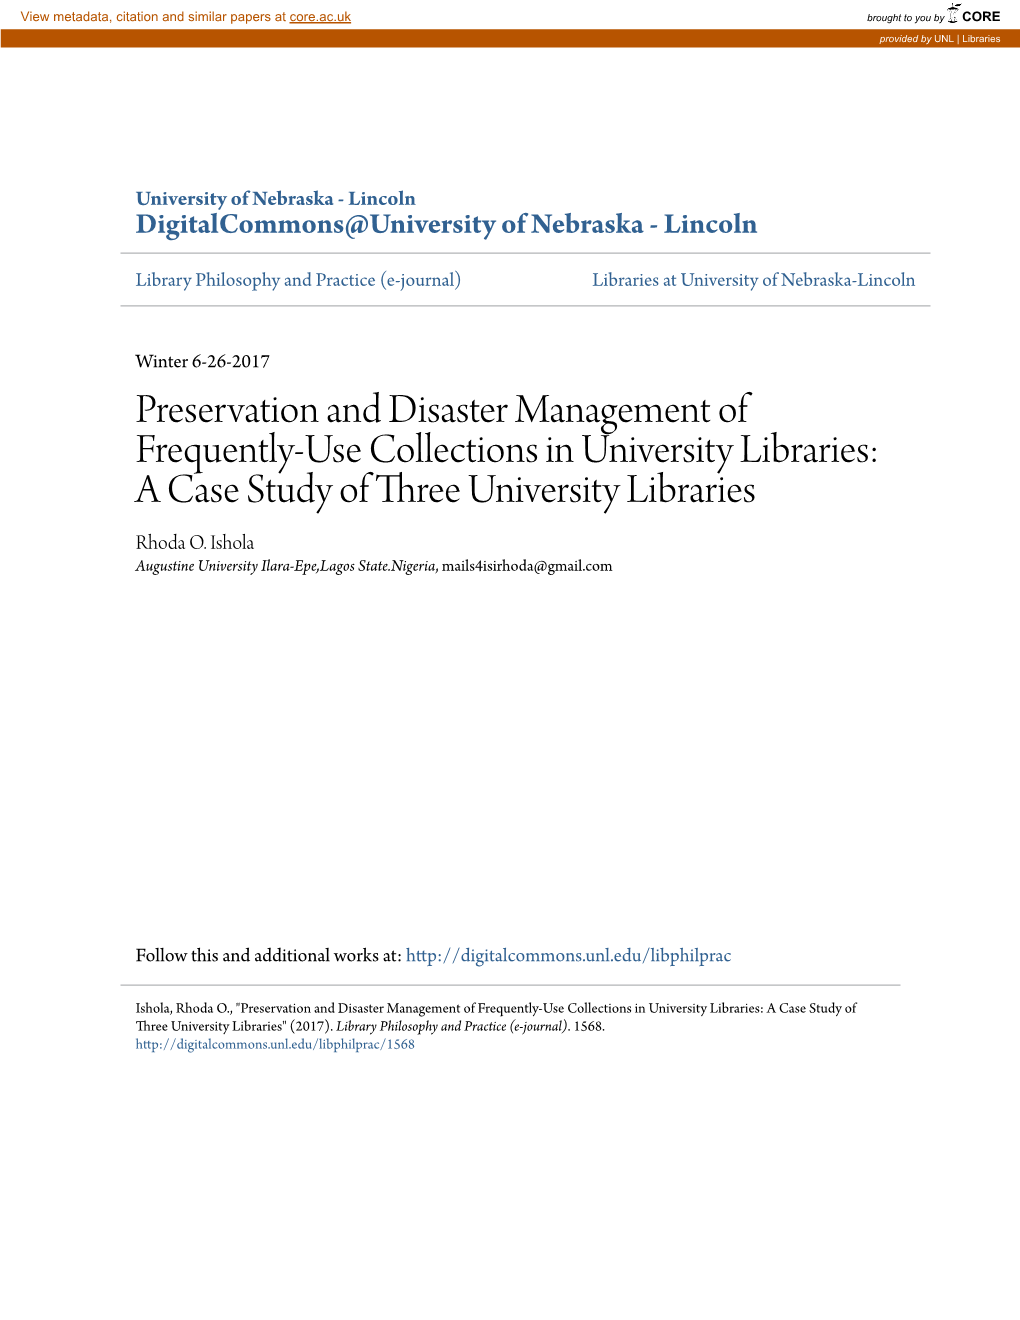 Preservation and Disaster Management of Frequently-Use Collections in University Libraries: a Case Study of Three University Libraries Rhoda O